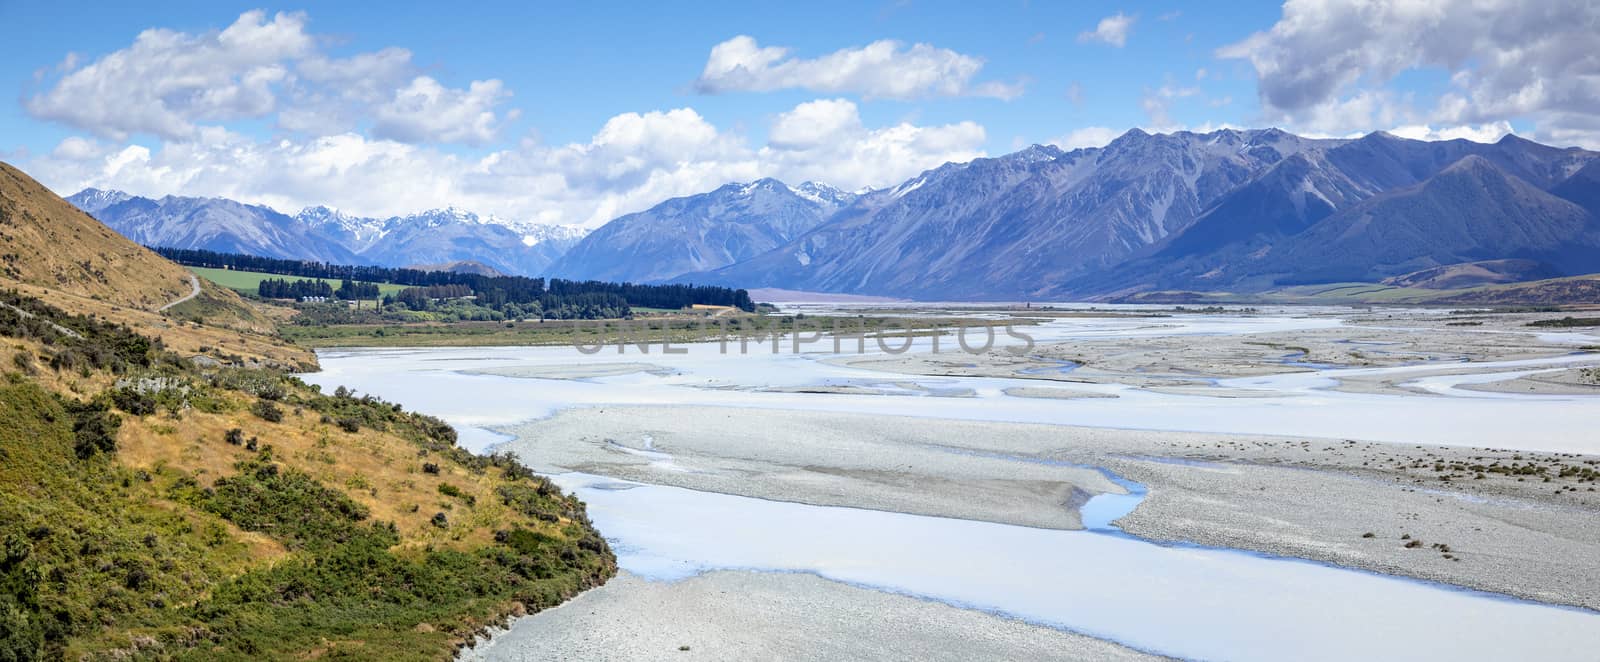 An image of the Mountain Alps scenery in south New Zealand